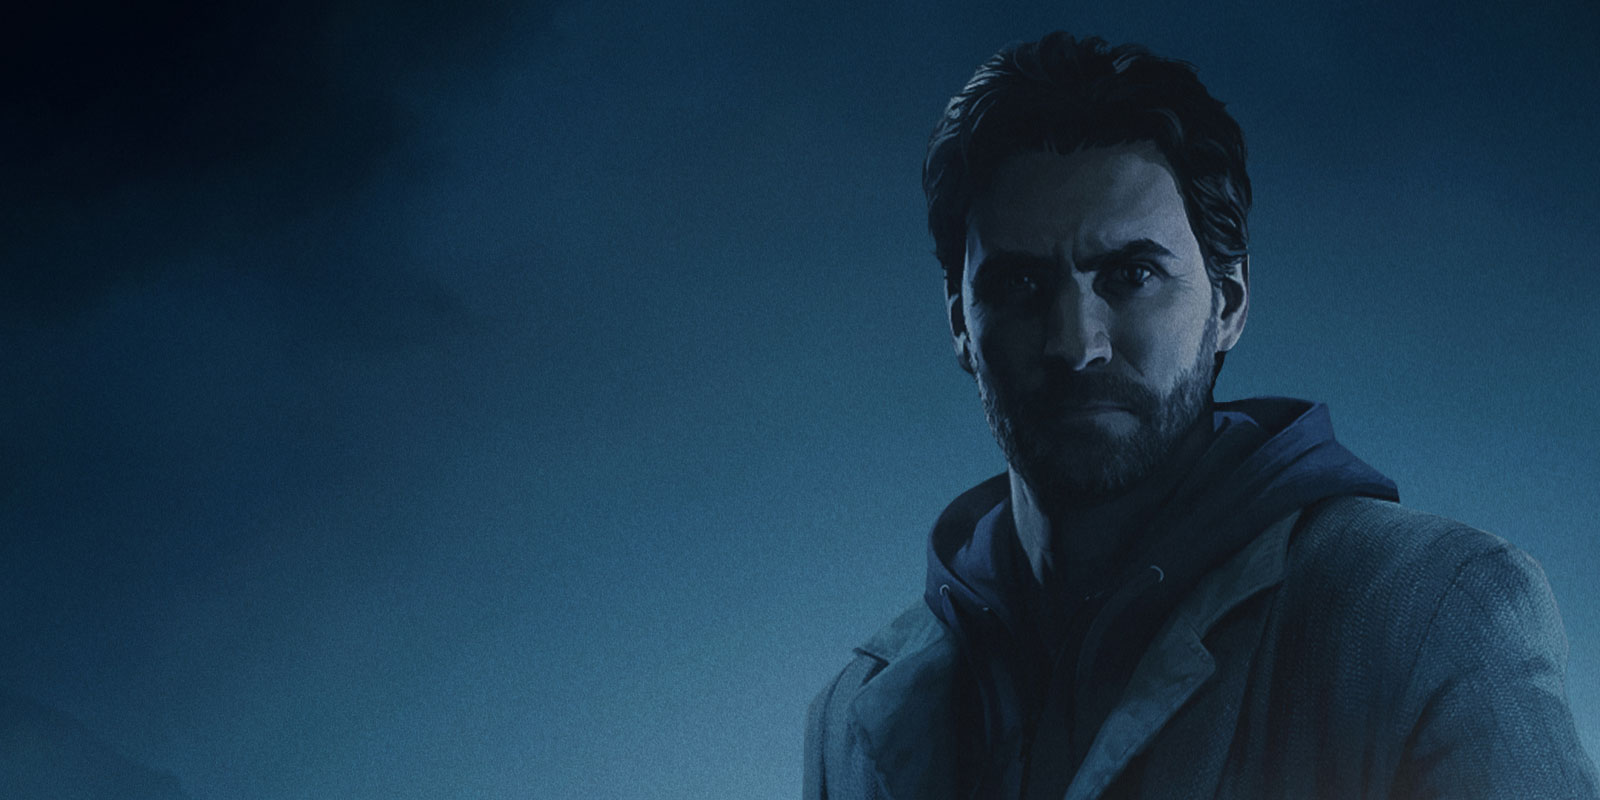 Remedy reveals Alan Wake 2 at The Game Awards Eggplante!